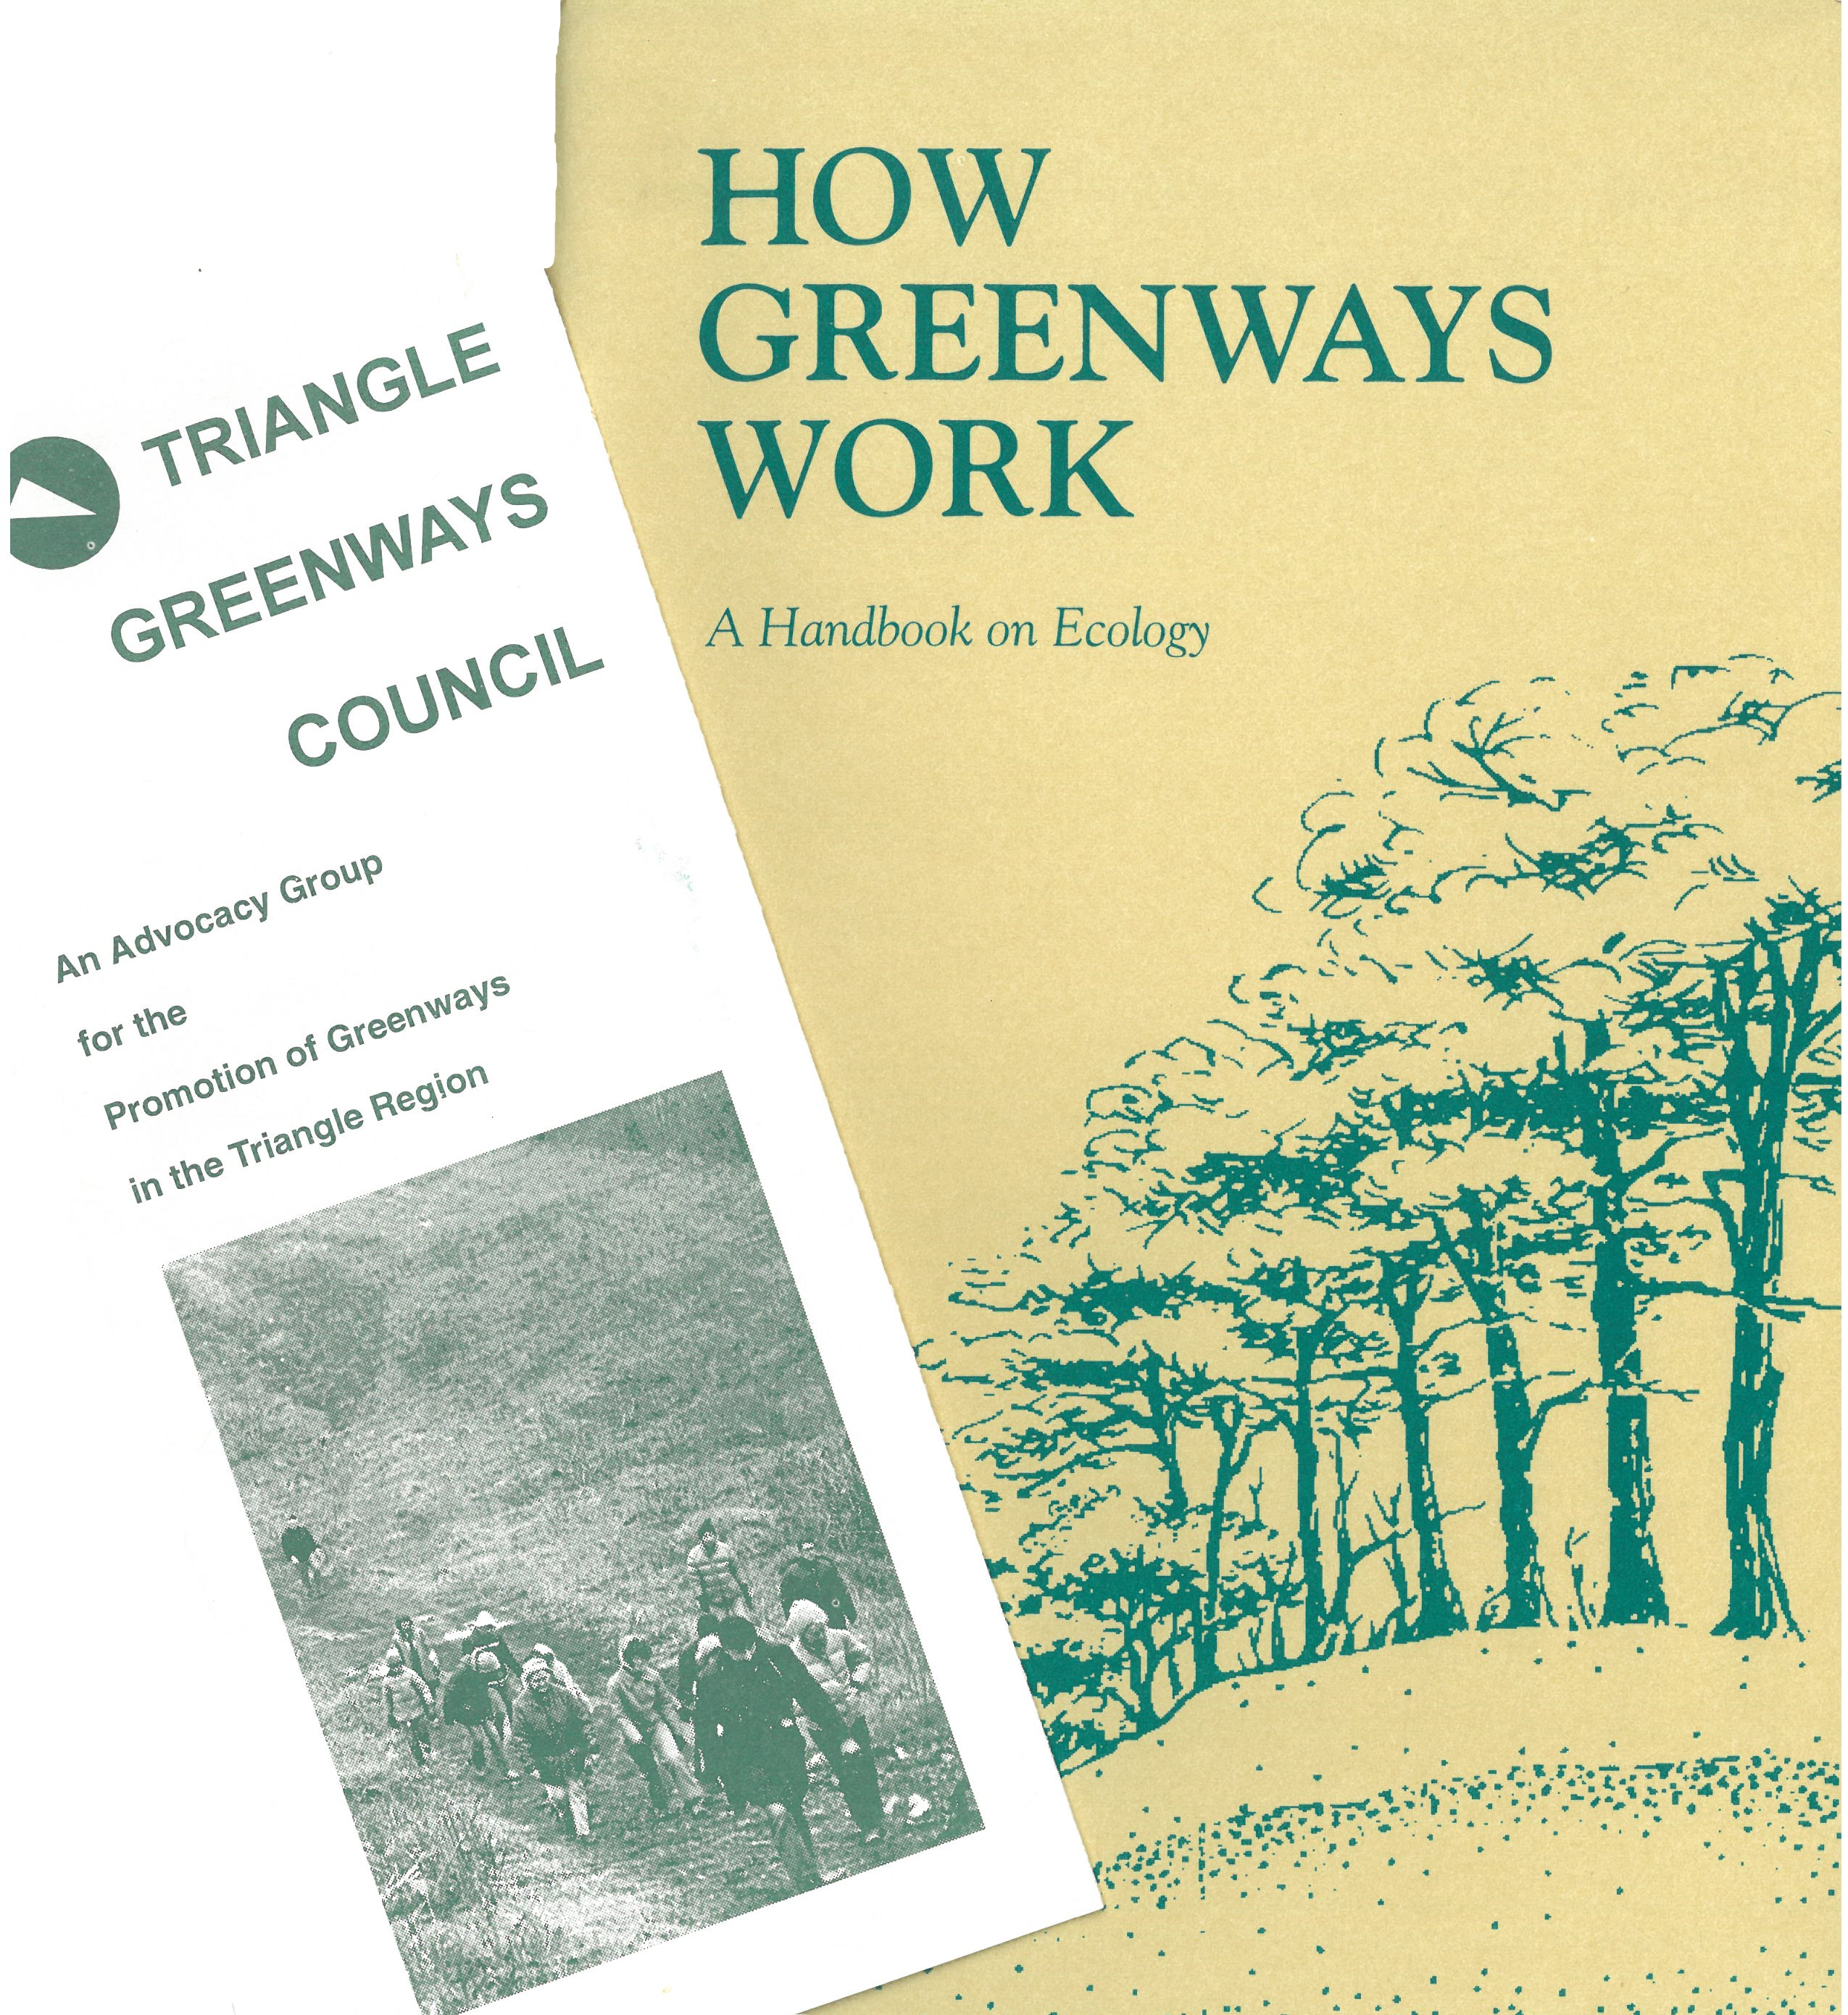 Pamphlets from the Triangle Greenways Council Records